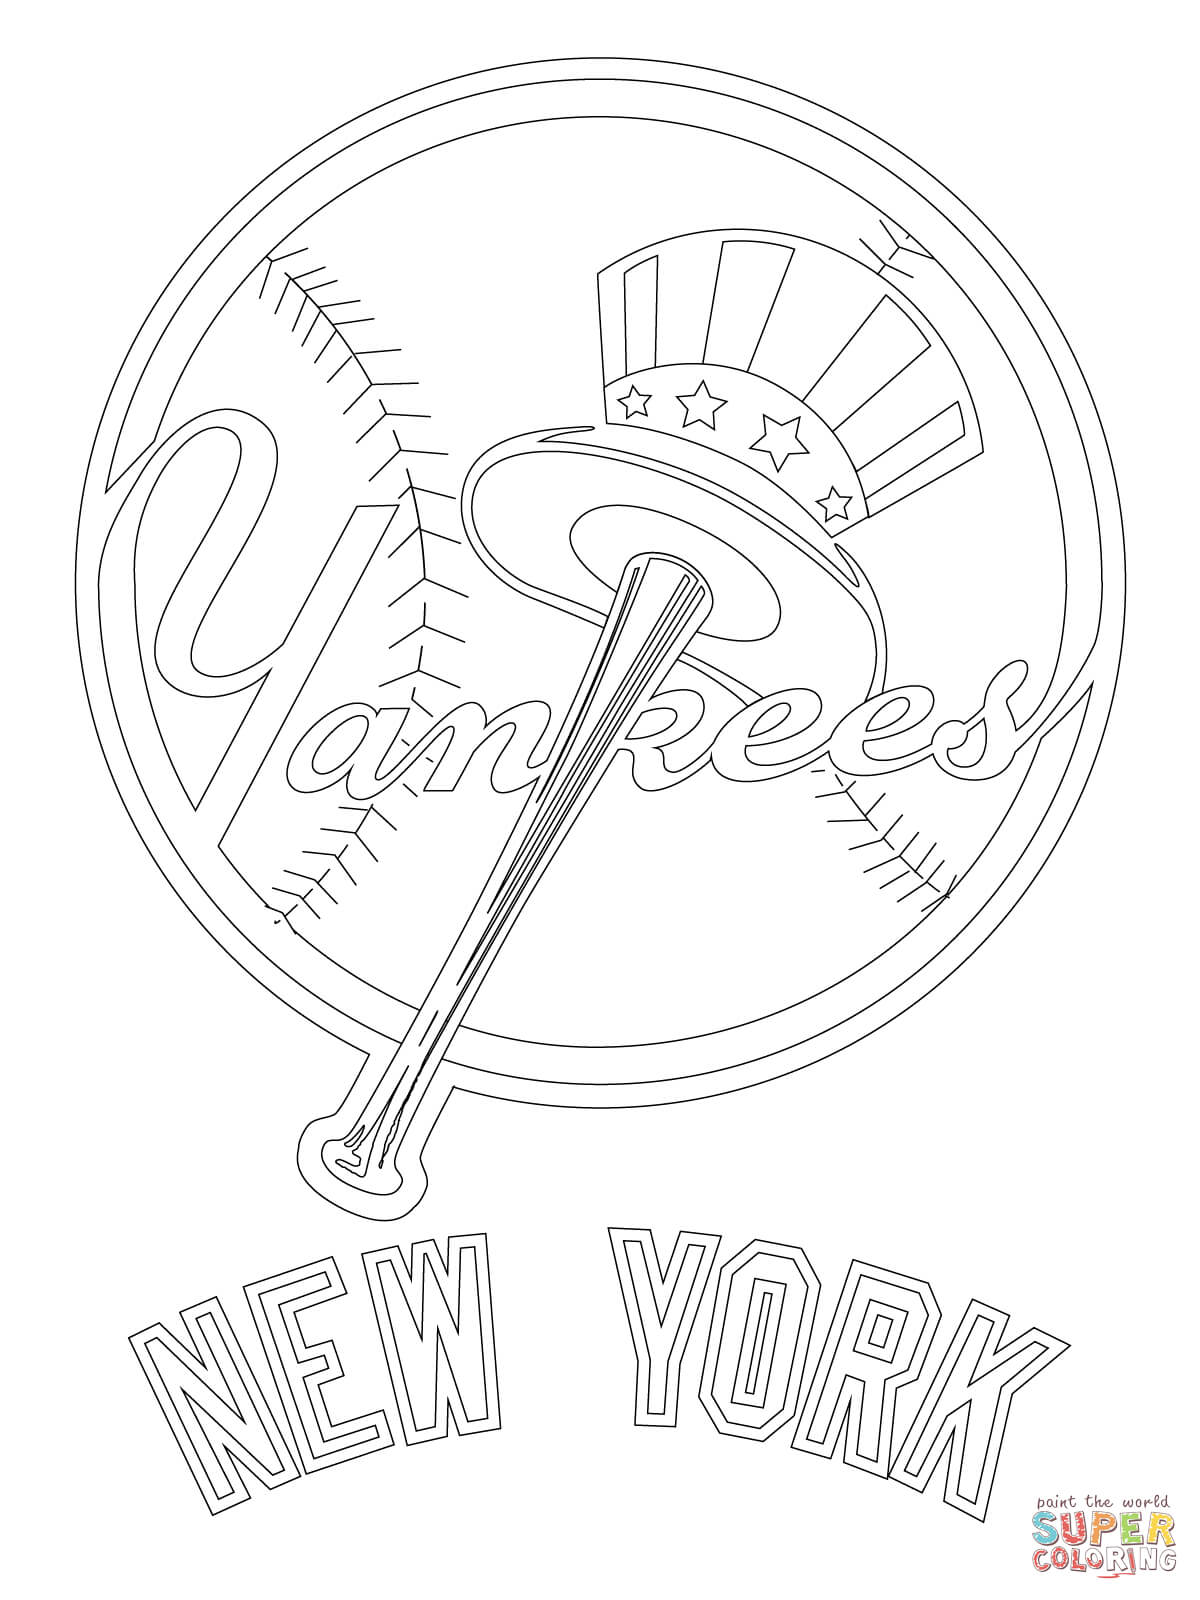 New York Yankees Logo coloring page | Free Printable Coloring Pages